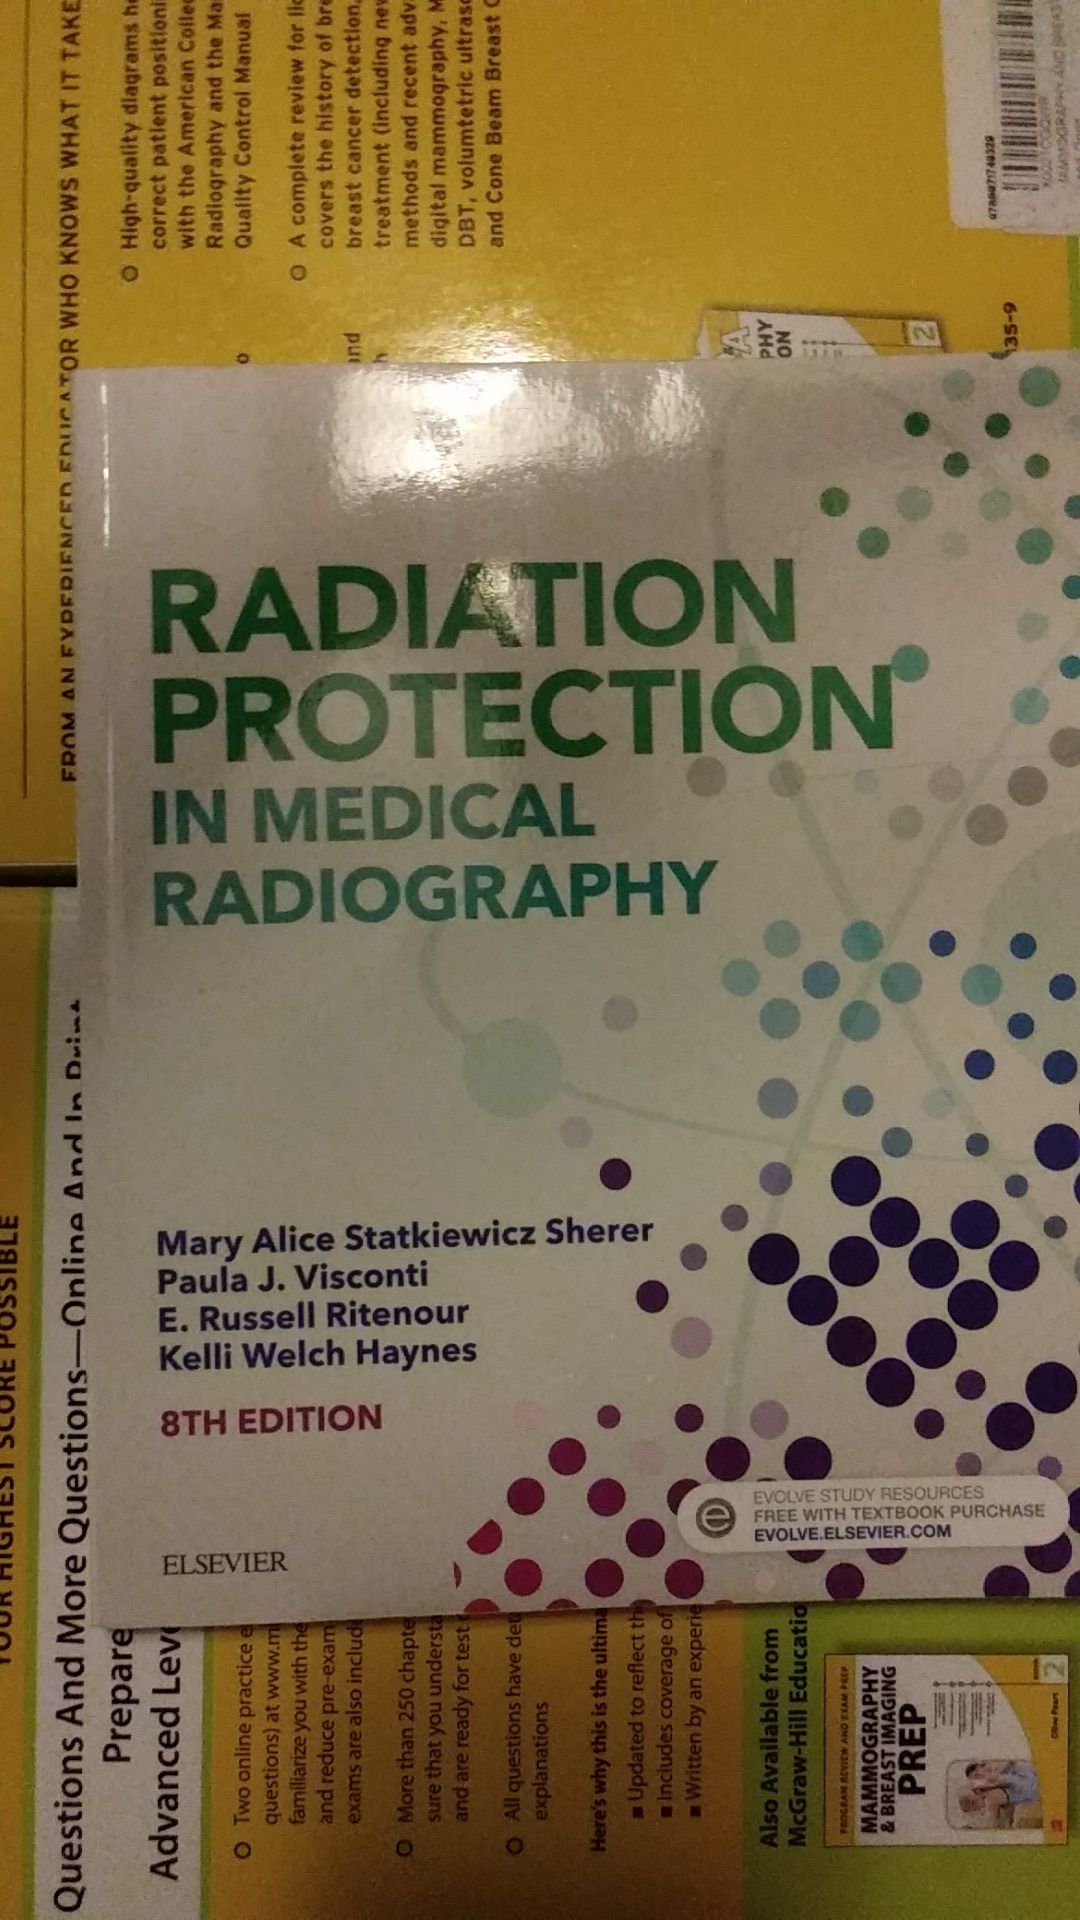 Radiation Protection in Medical Radiography, 8th ed.